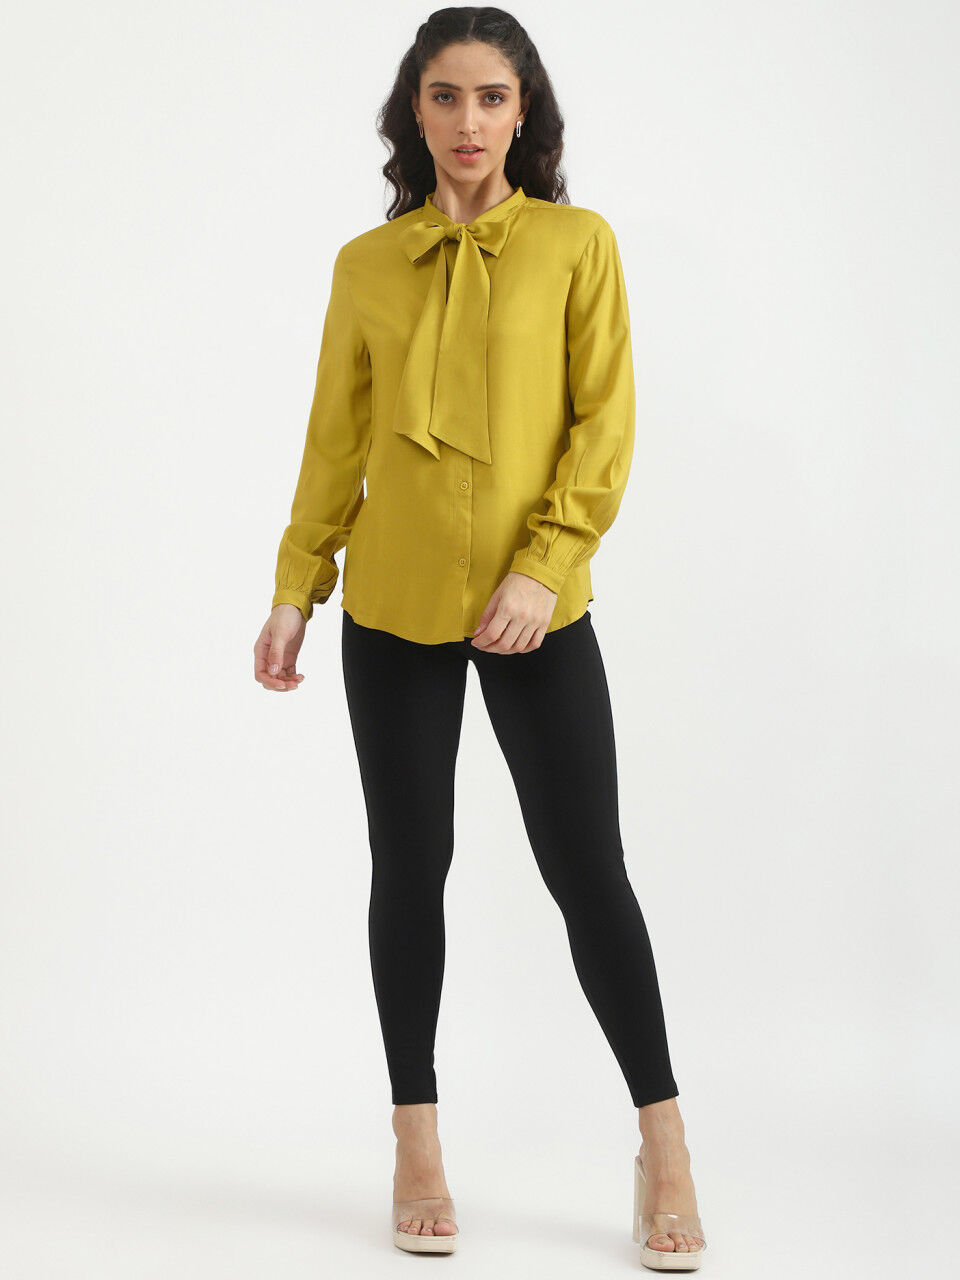 United Colors of Benetton Ladies Long Sleeve Solid Top